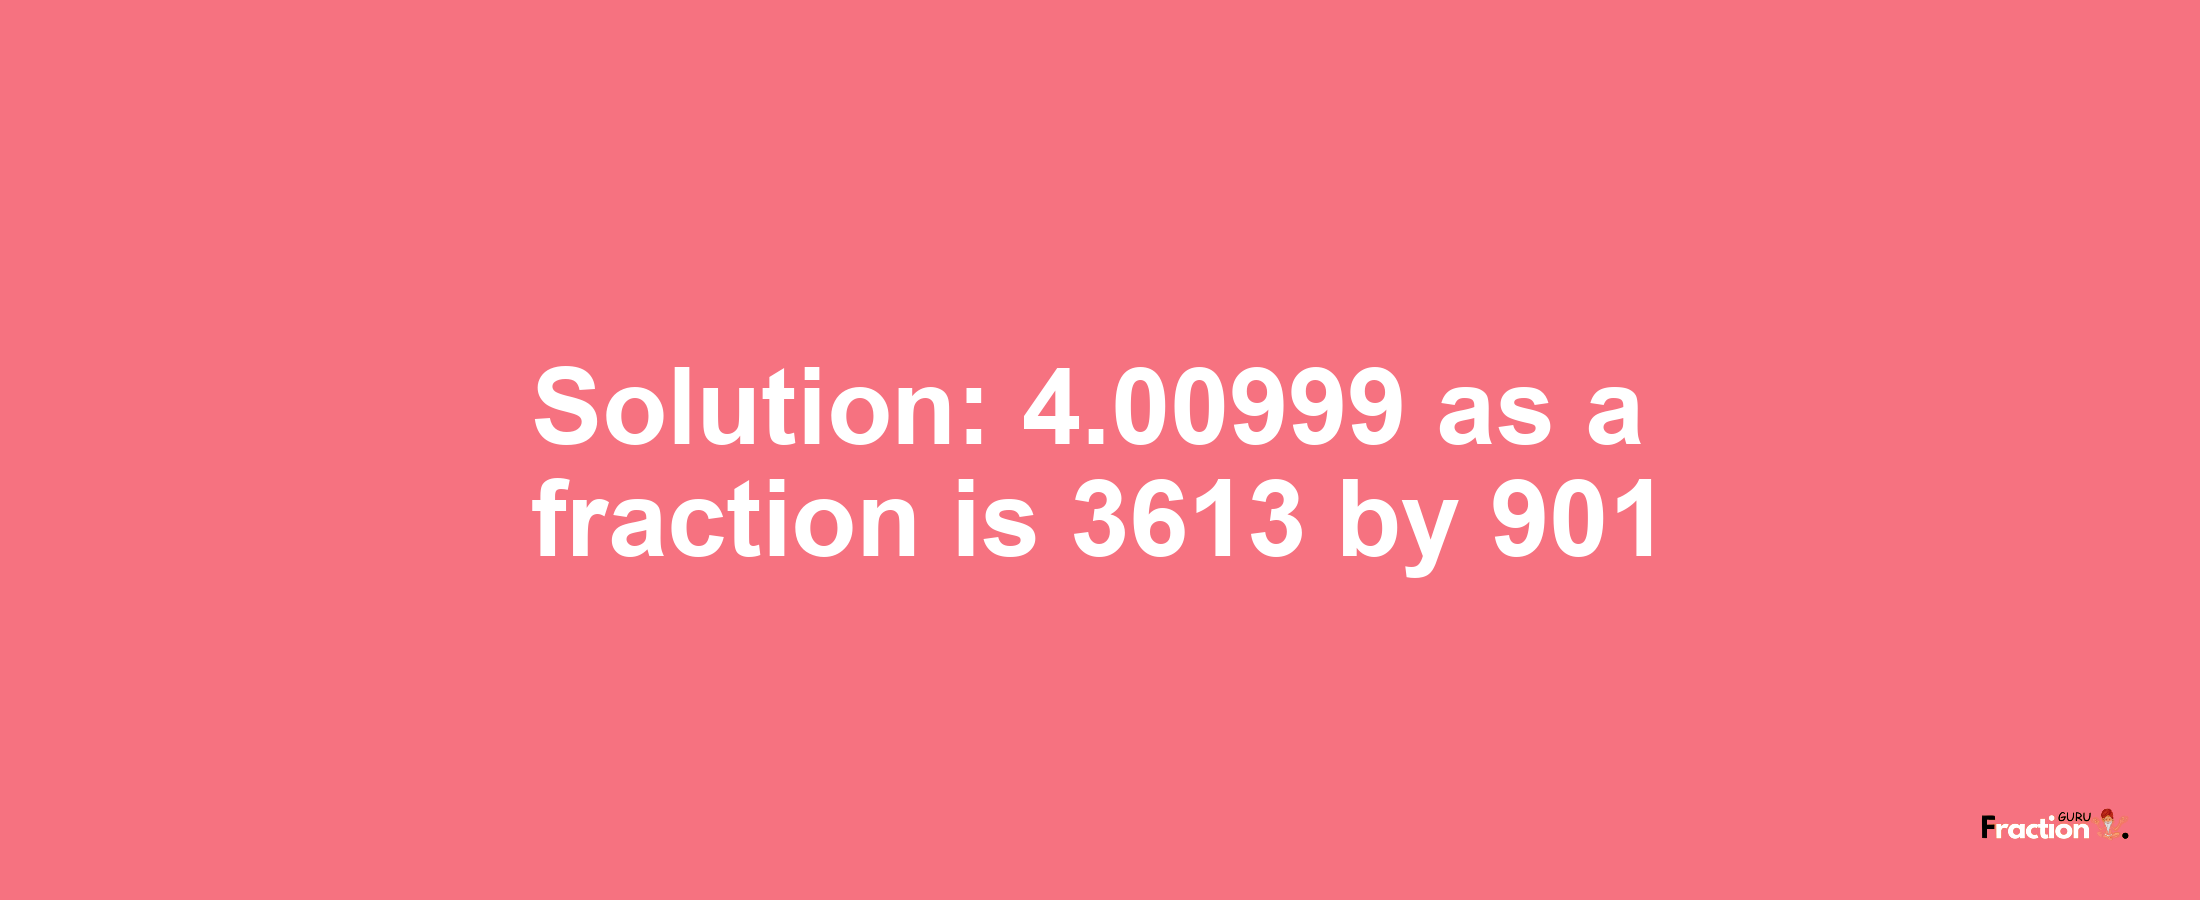 Solution:4.00999 as a fraction is 3613/901